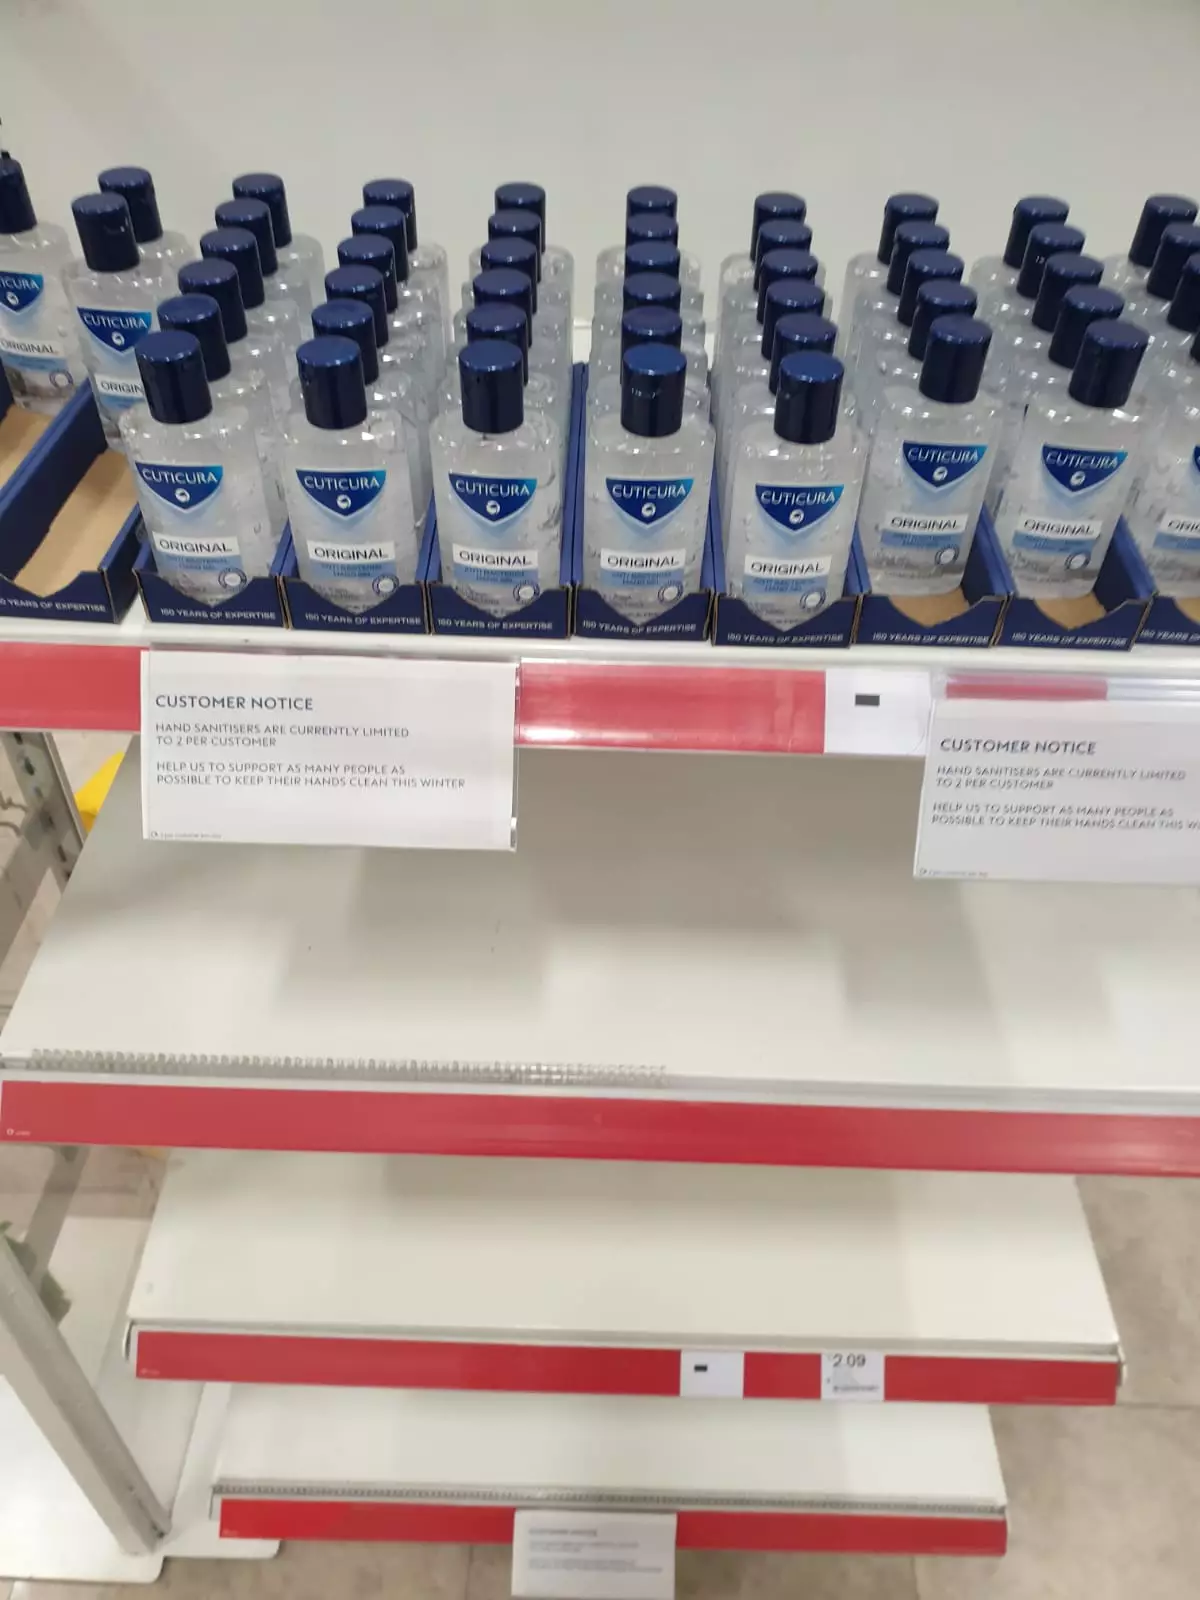 With increasing numbers of people putting in large orders of antibac products, shoppers are being met with empty shelves. (